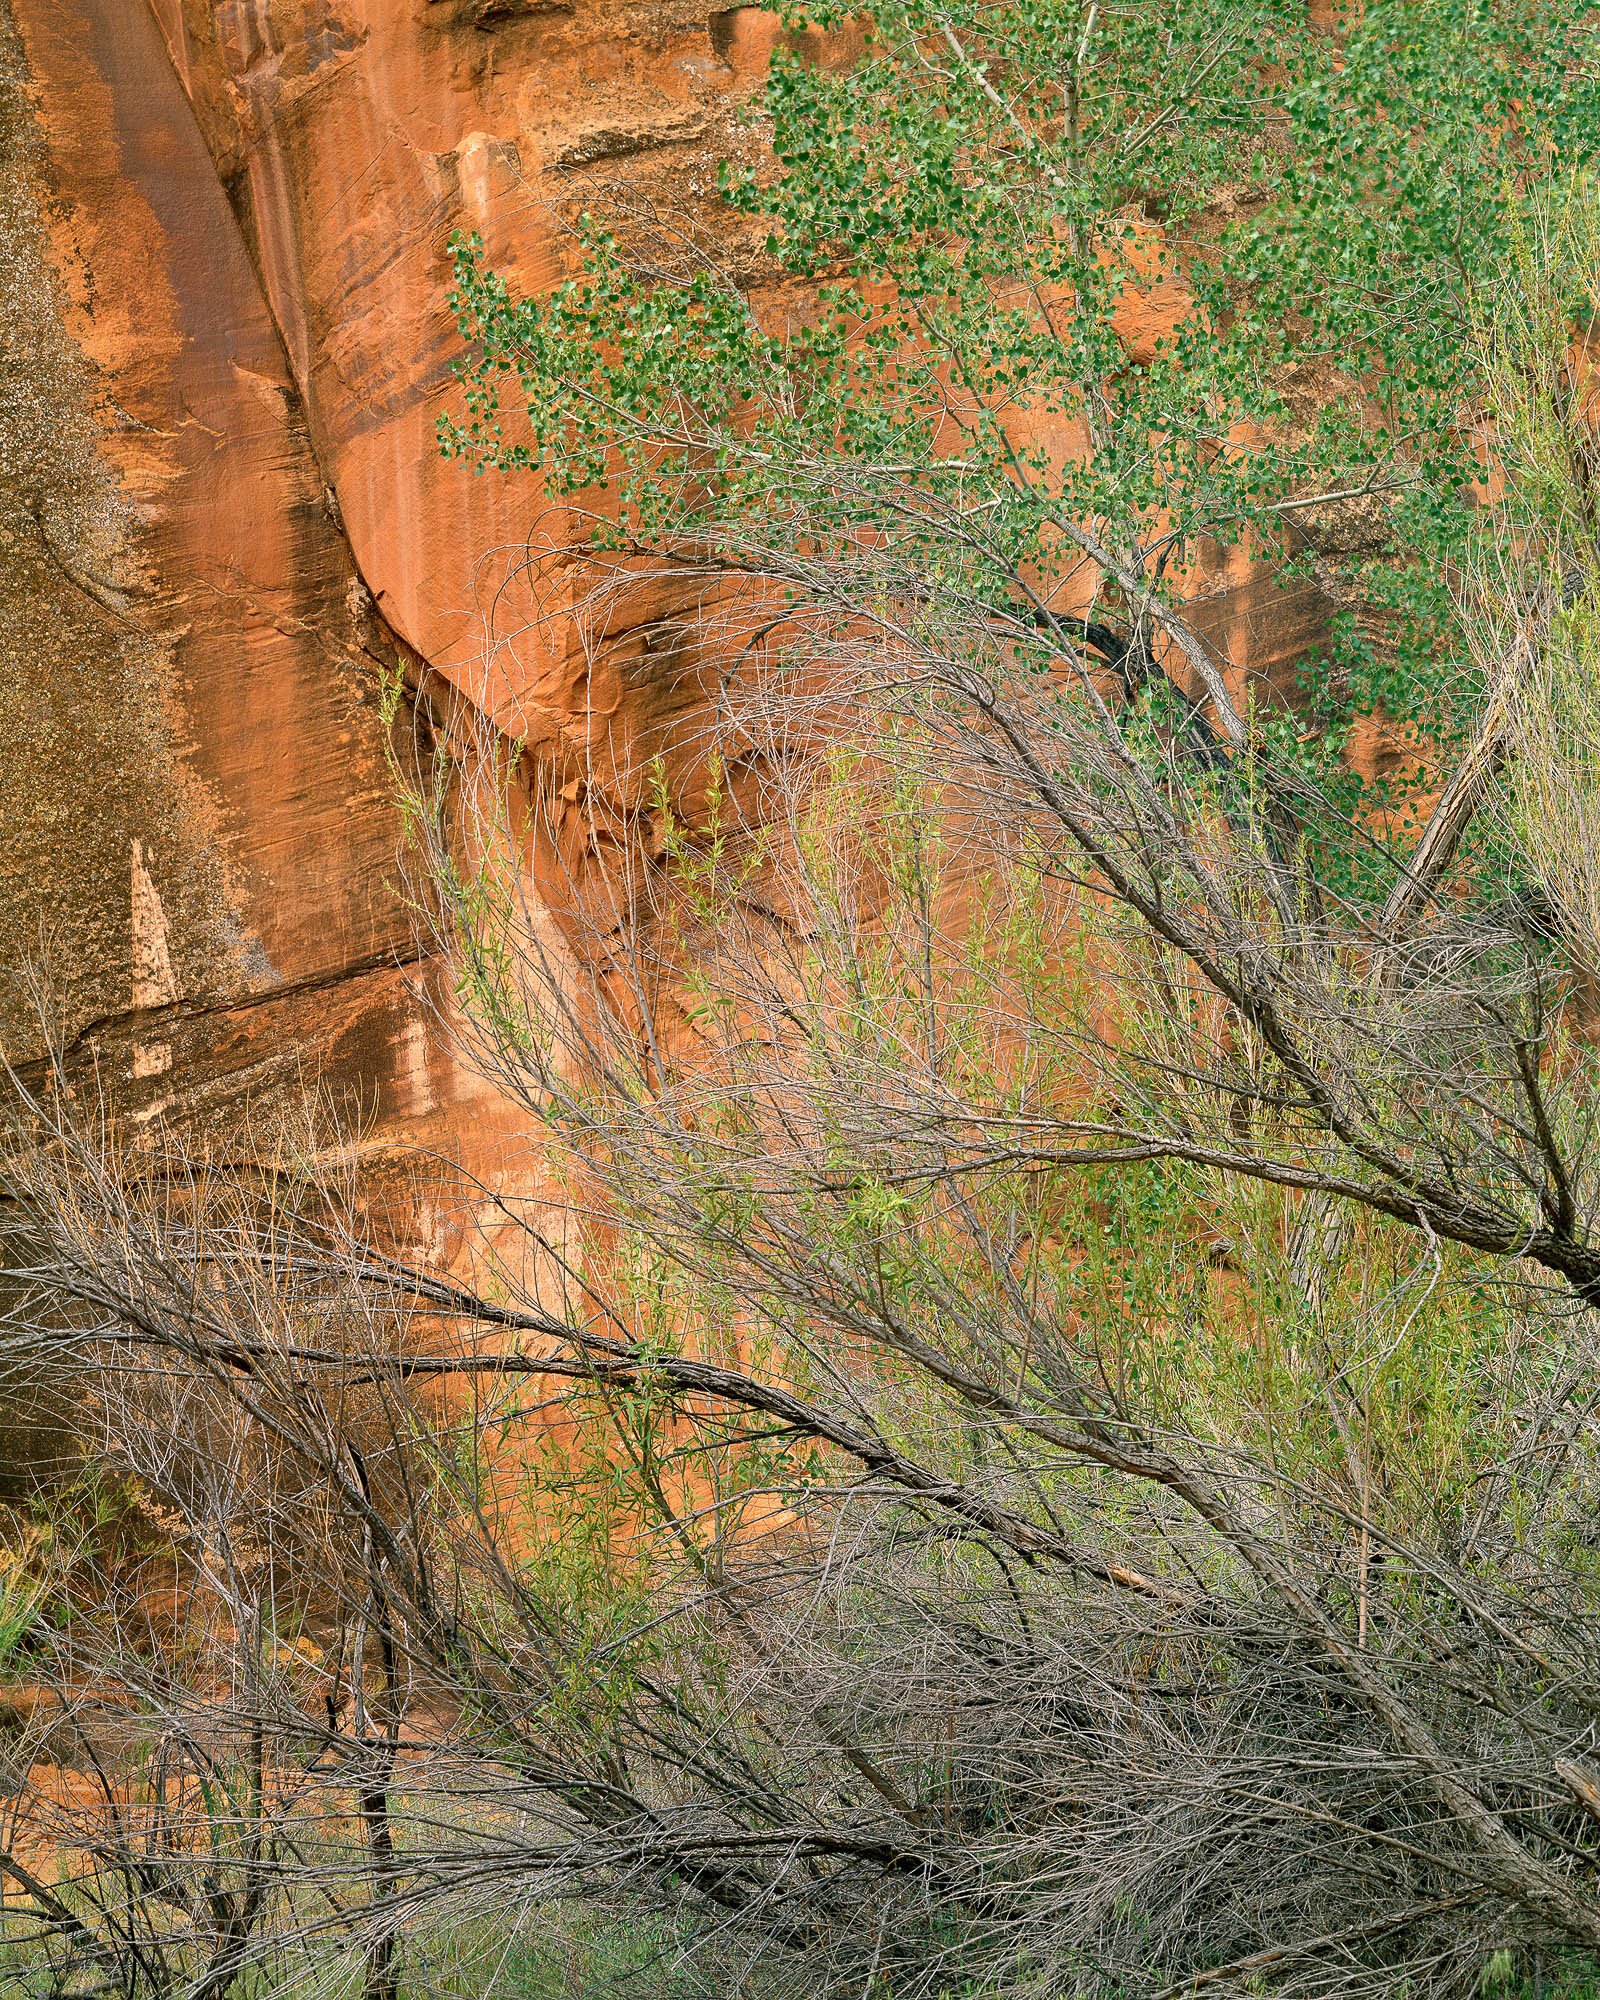 Willow, Cottonwood and Wall, Coyote Gulch